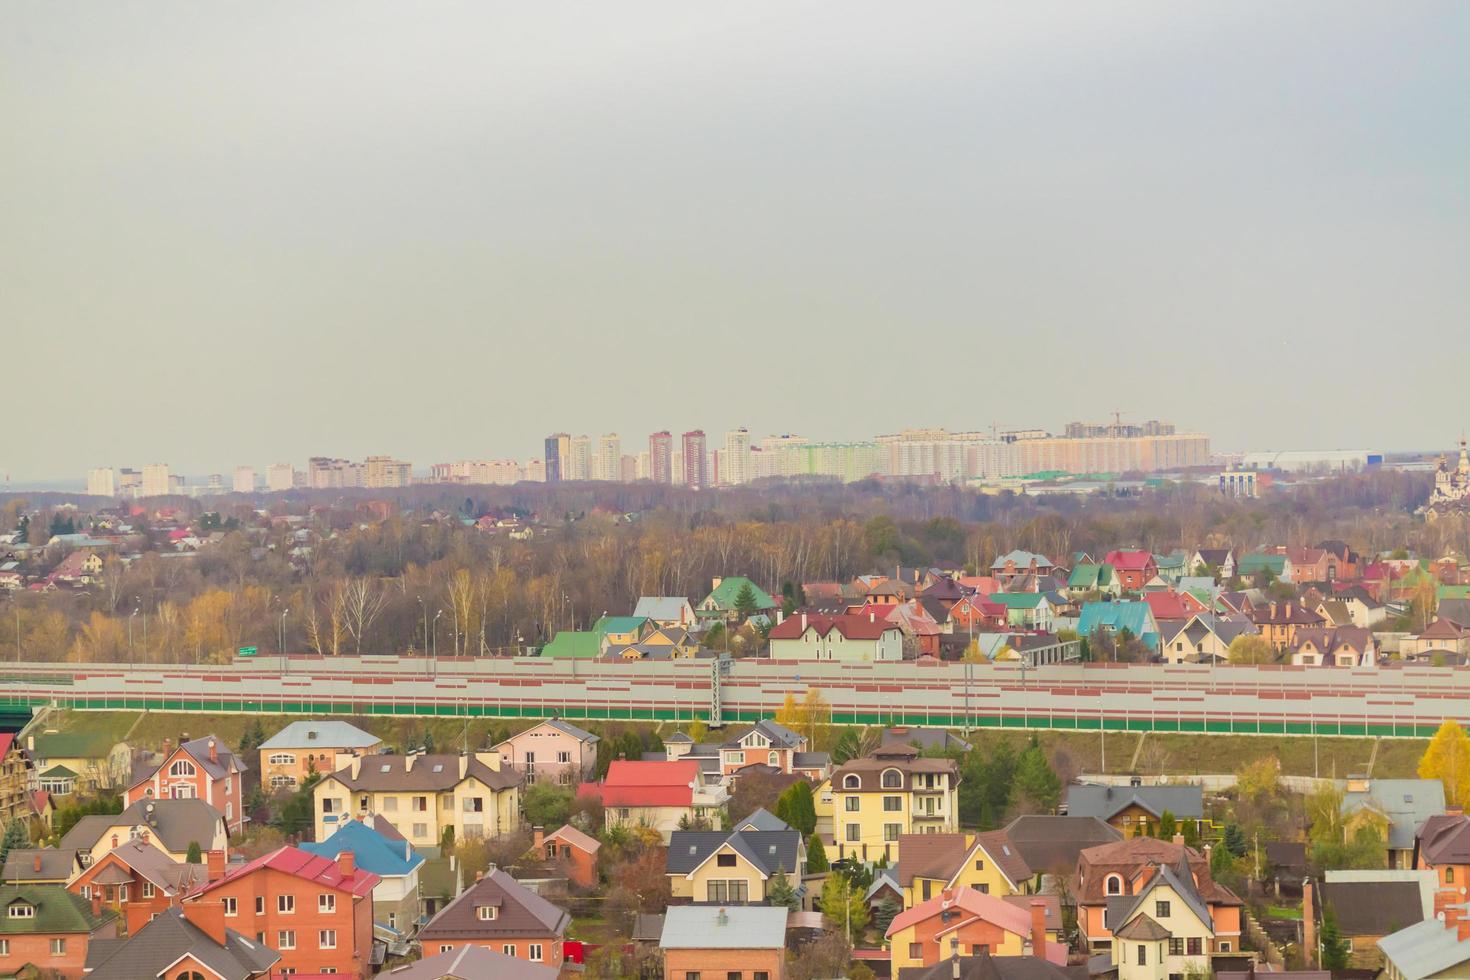 Khimki, Russia, 2018 - Areal view of a part of Khimki city with a plenty of buildings in neighborhood in autumn. Urban Landscape photo